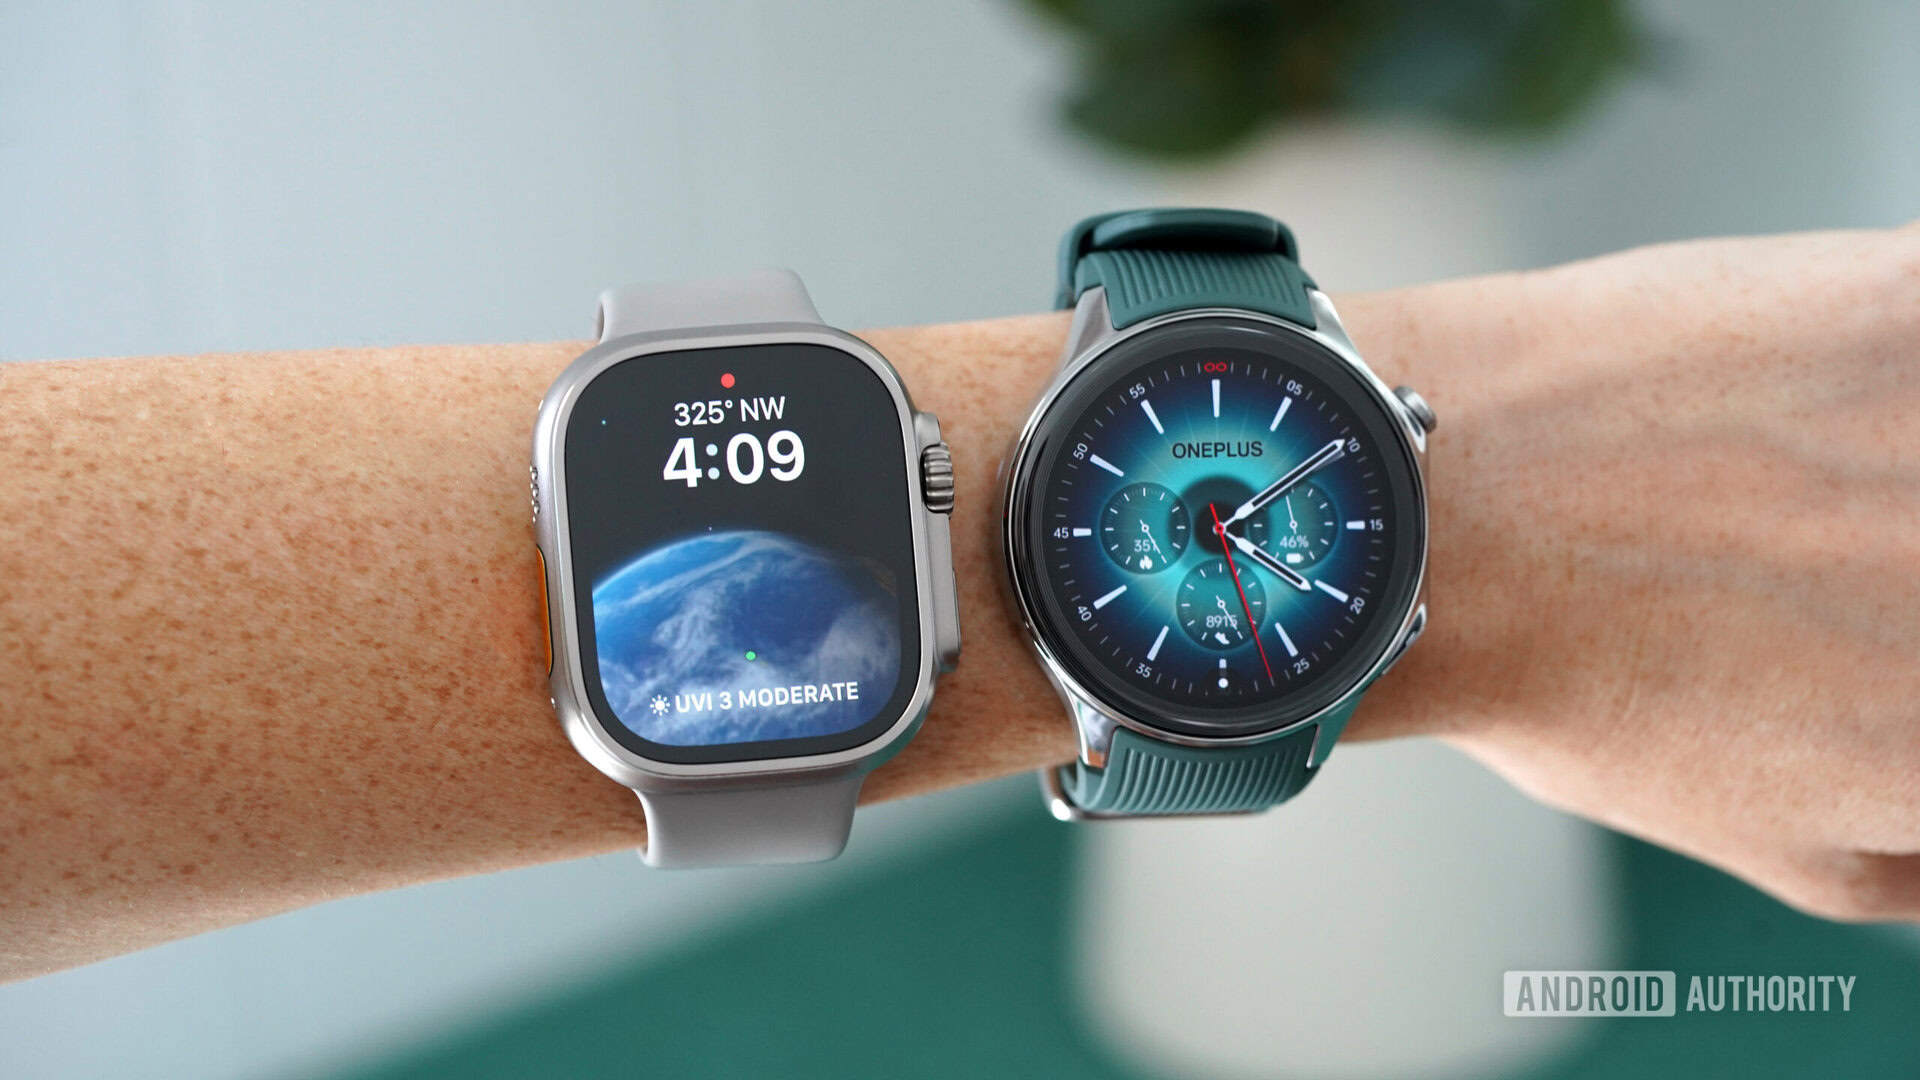 What shape do you prefer for your smartwatches?